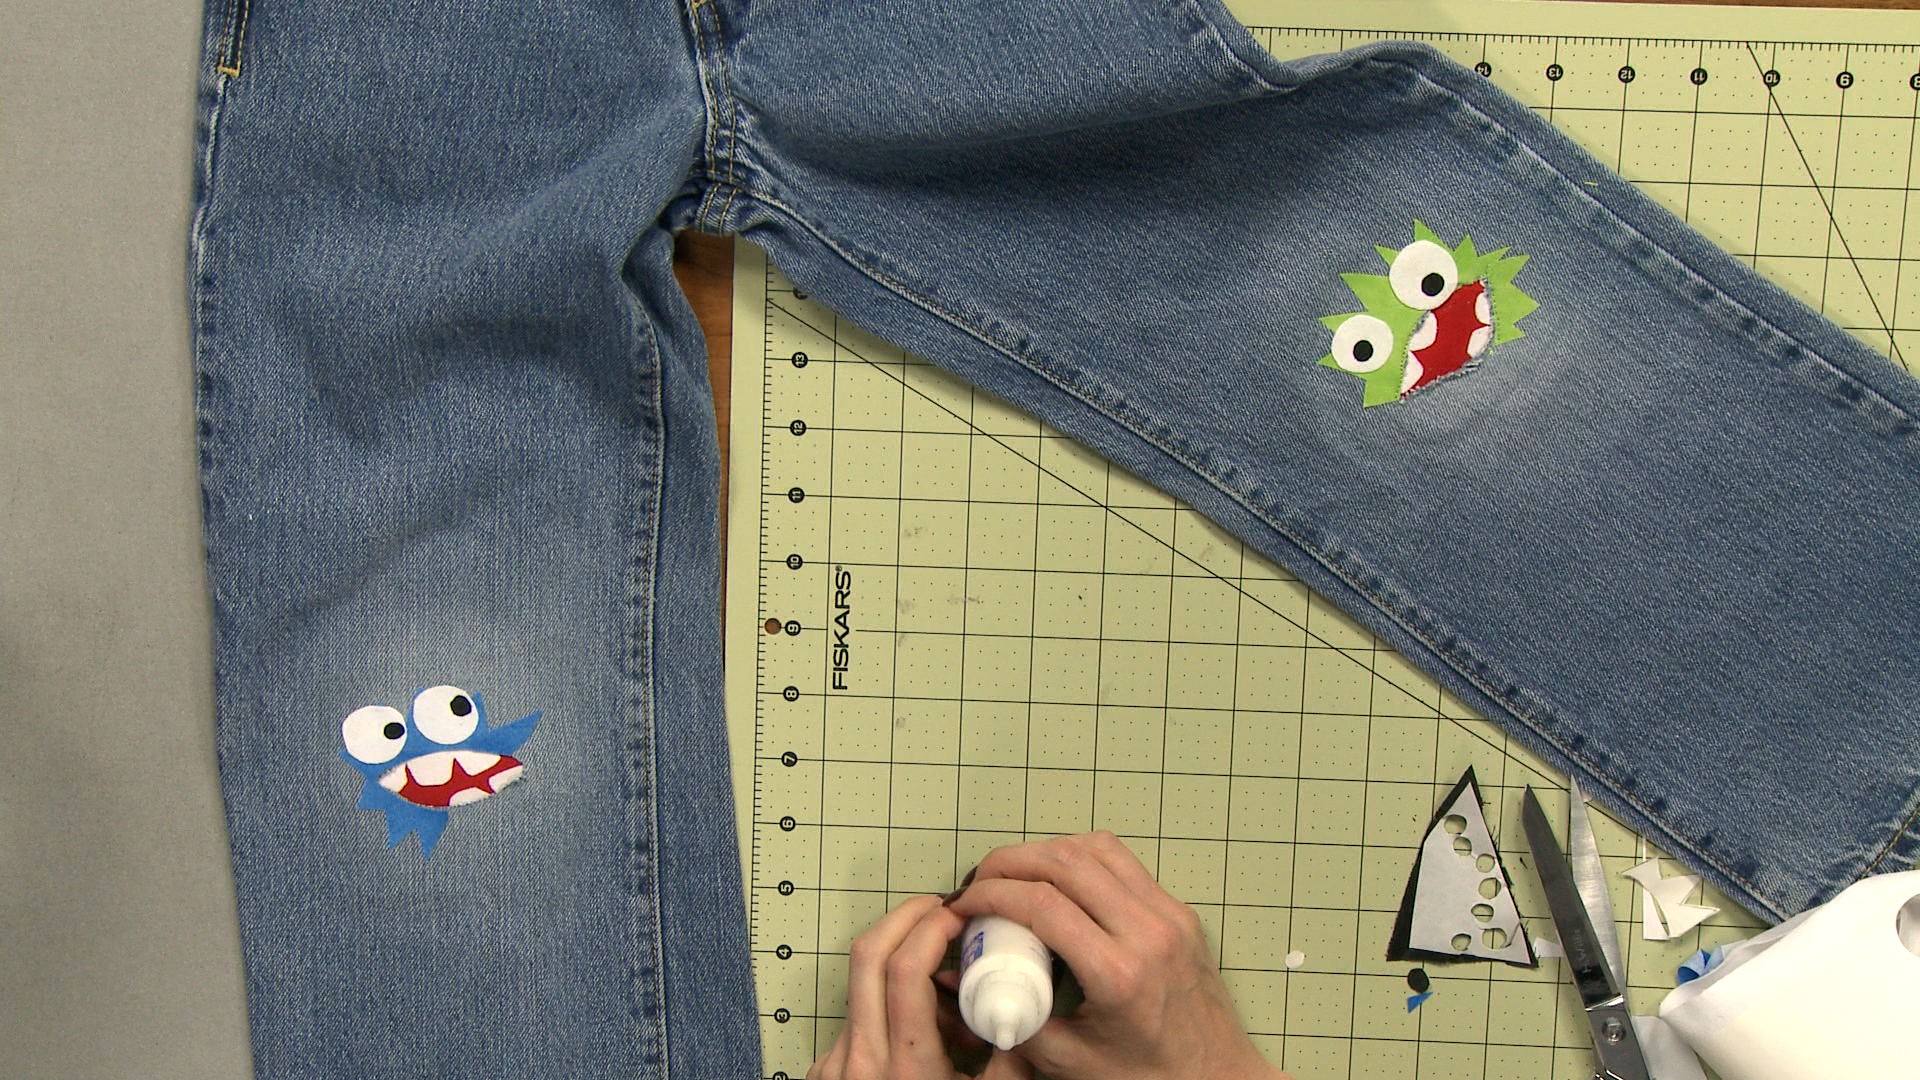 Cute monster patches on jeans